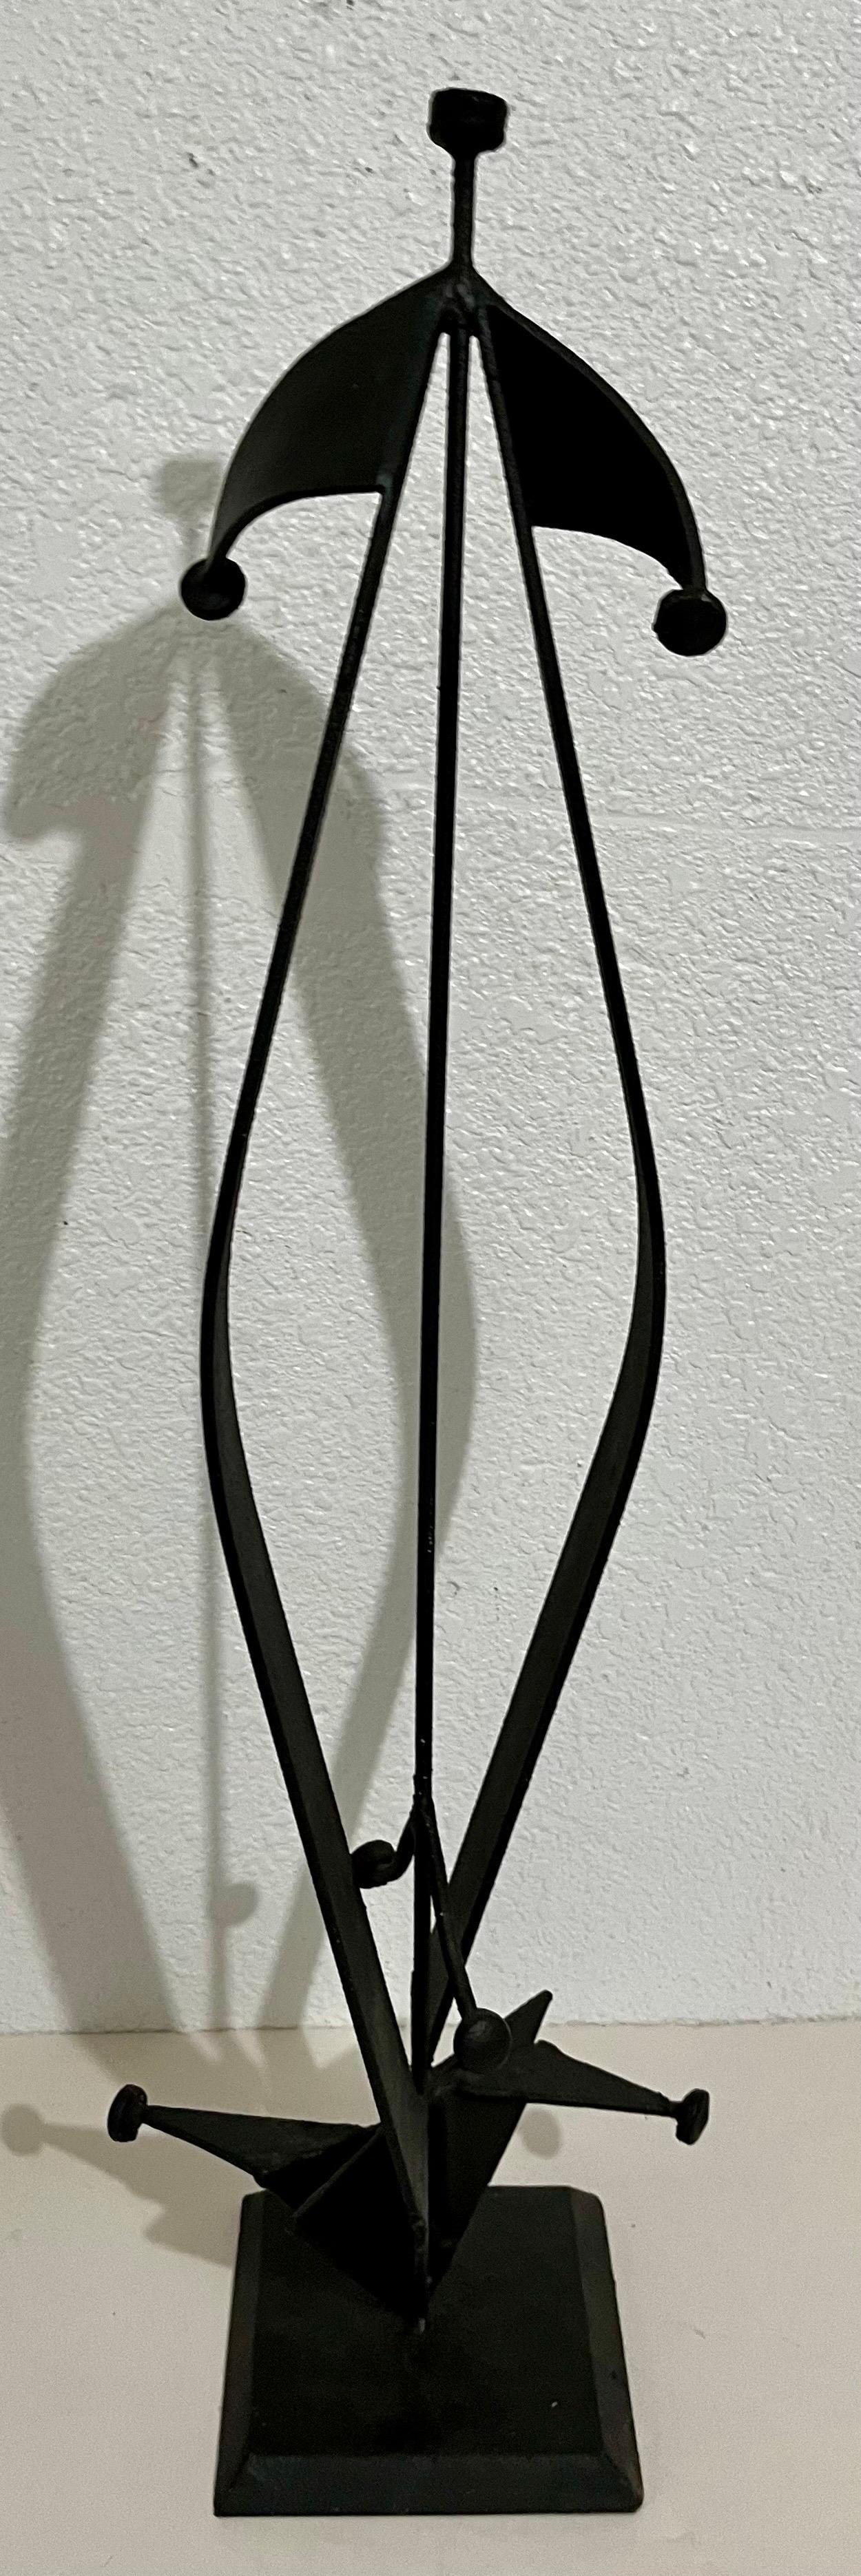 Large Mario Almaguer Cuban Art Welded Painted Steel Abstract Sculpture Modernism For Sale 6